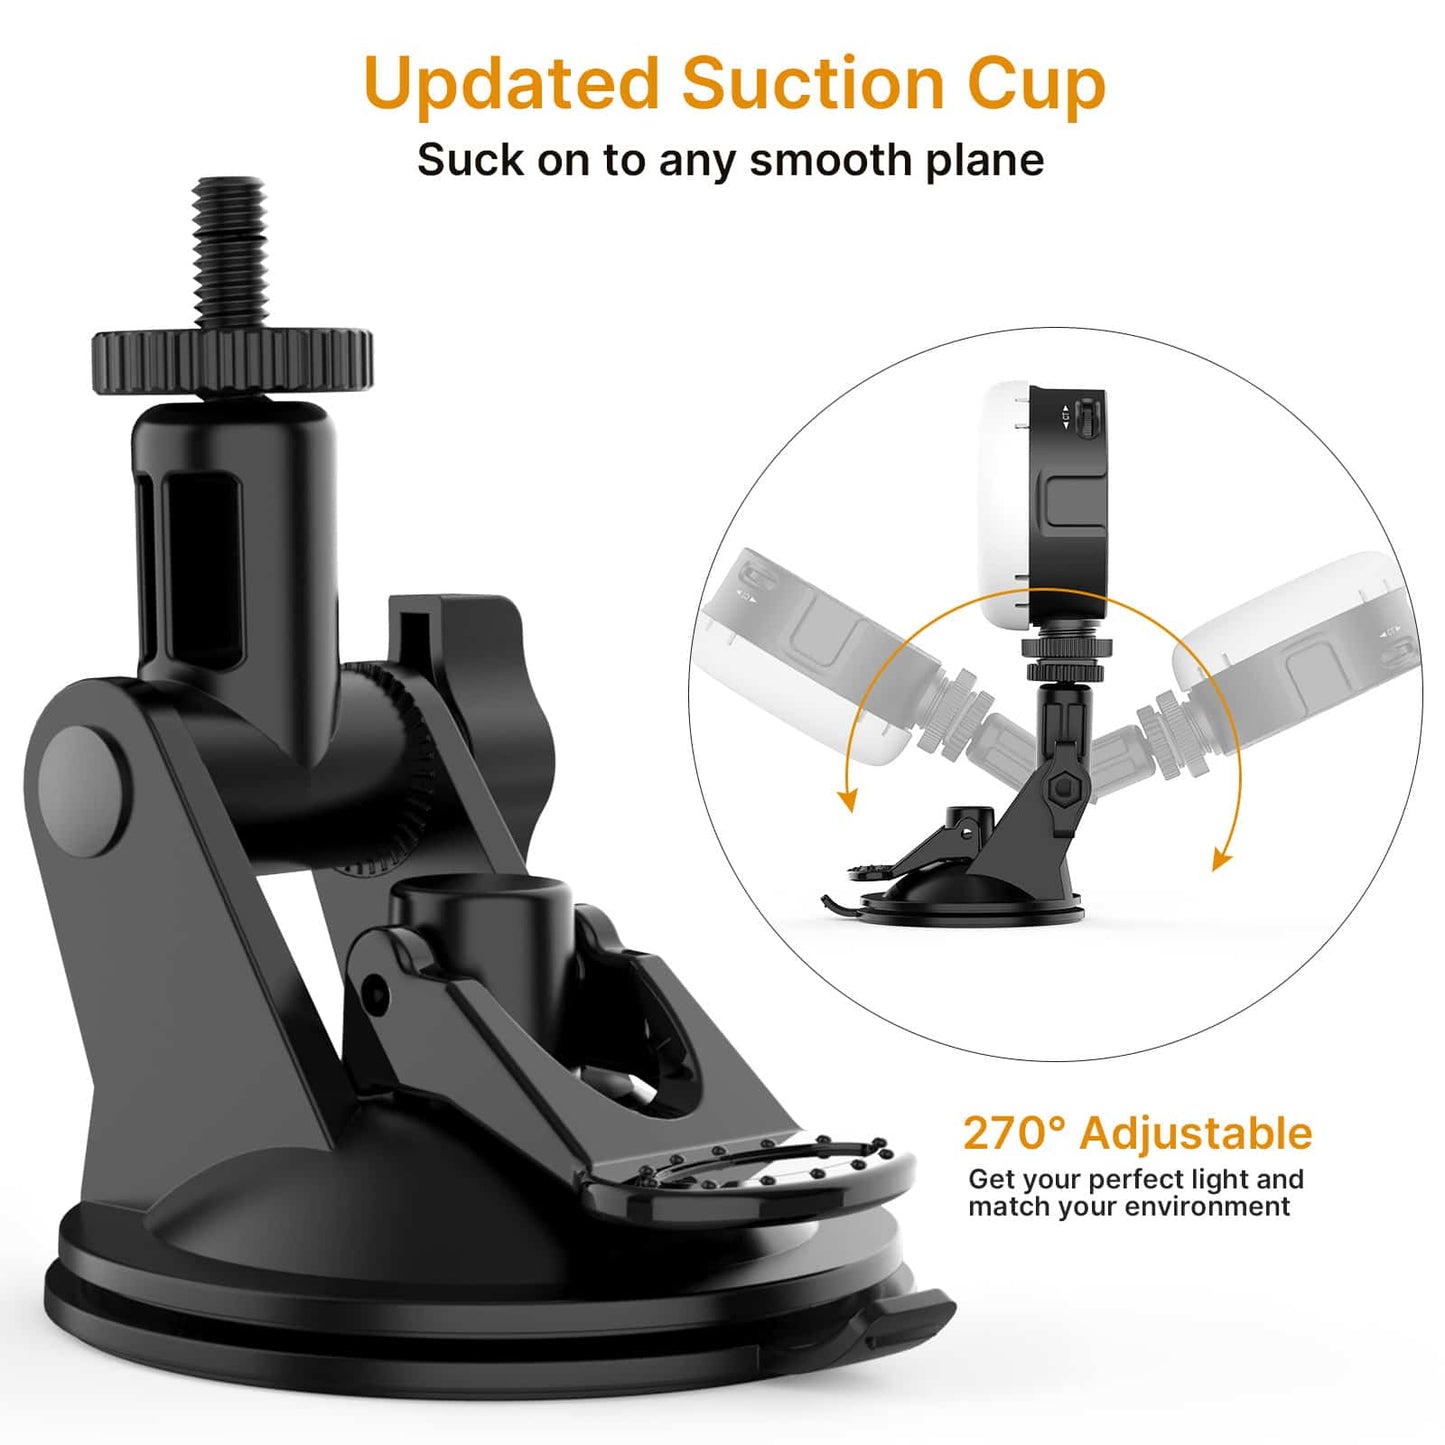 VIJIM VL69 for video calls - with suction cup for laptop / computer / monitor